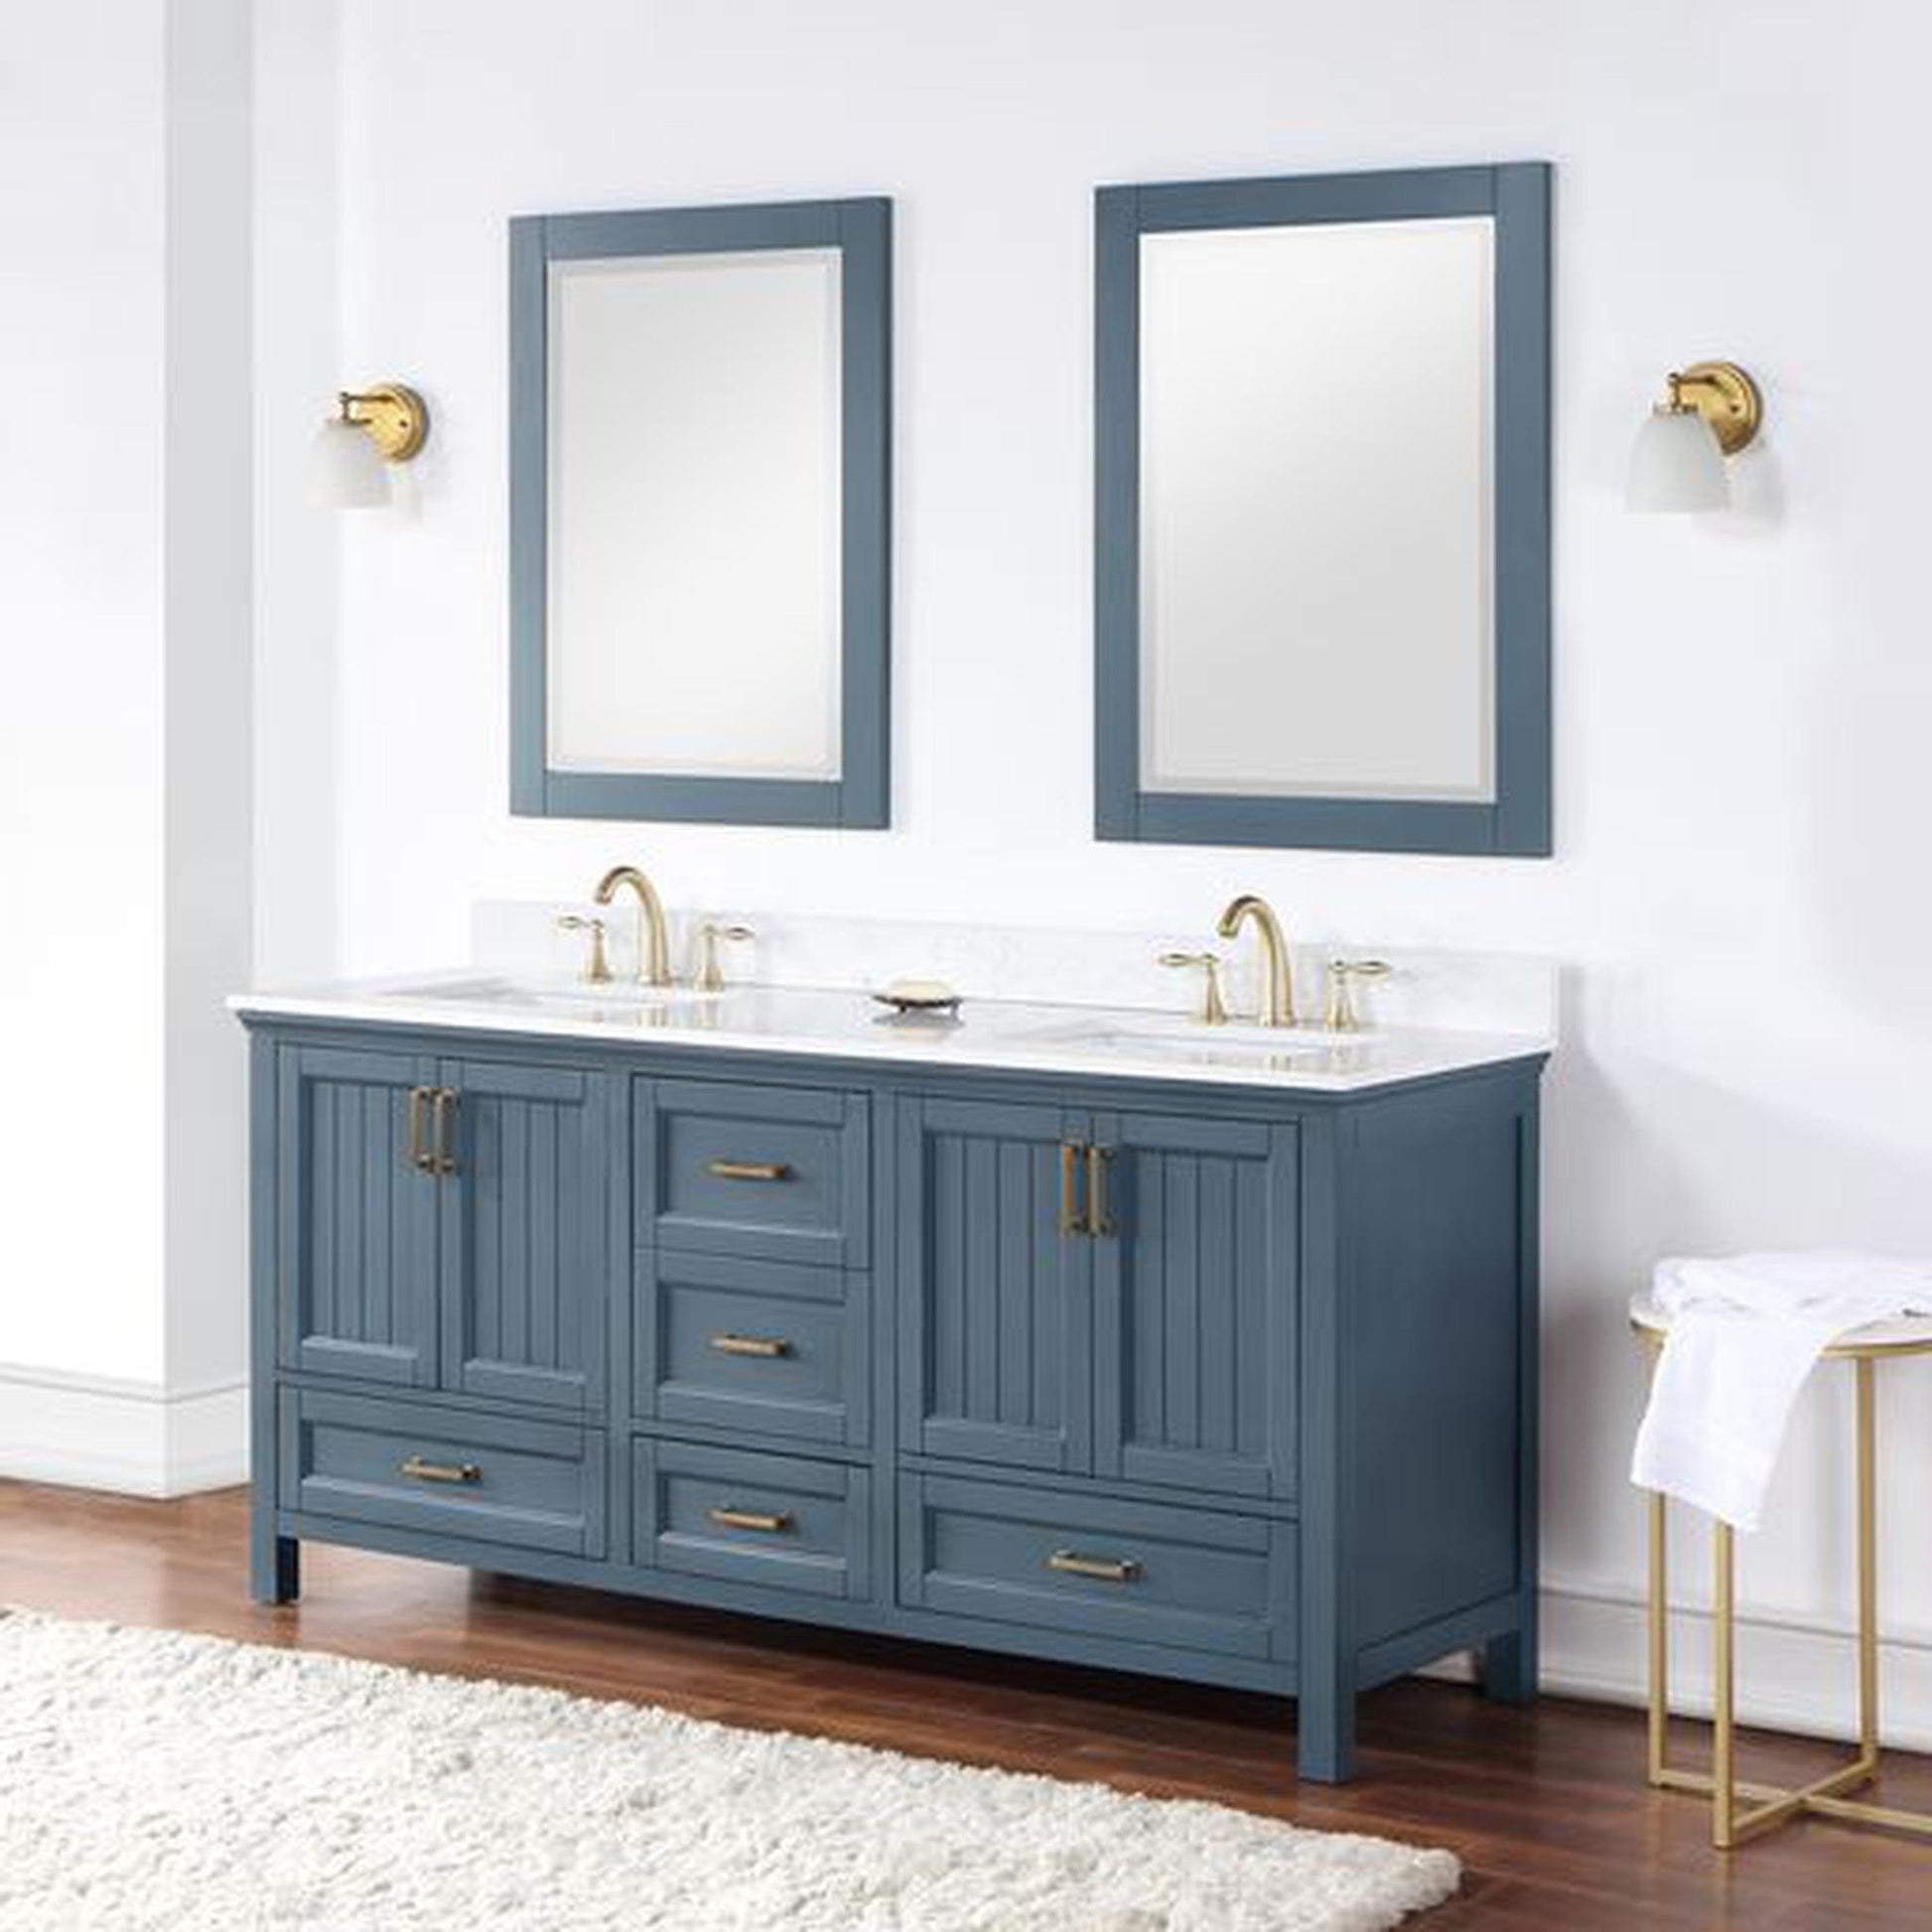 Altair Isla 72" Double Classic Blue Freestanding Bathroom Vanity Set With Mirror, Aosta White Composite Stone Top, Two Rectangular Undermount Ceramic Sinks, and Overflow